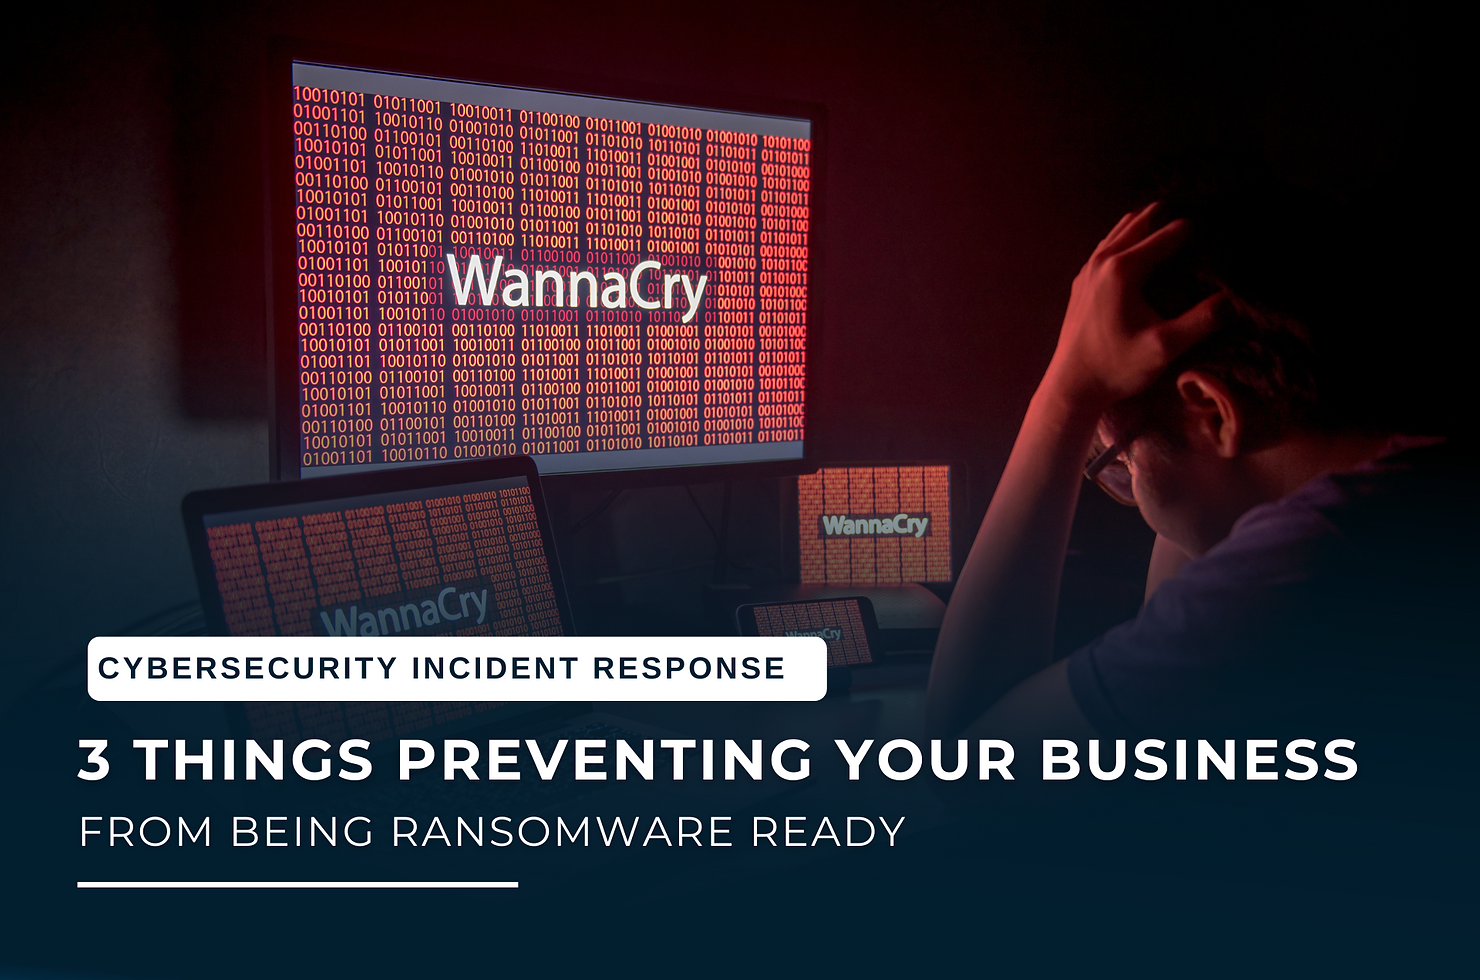 3 Things Preventing Your Business From Being Ransomware Ready